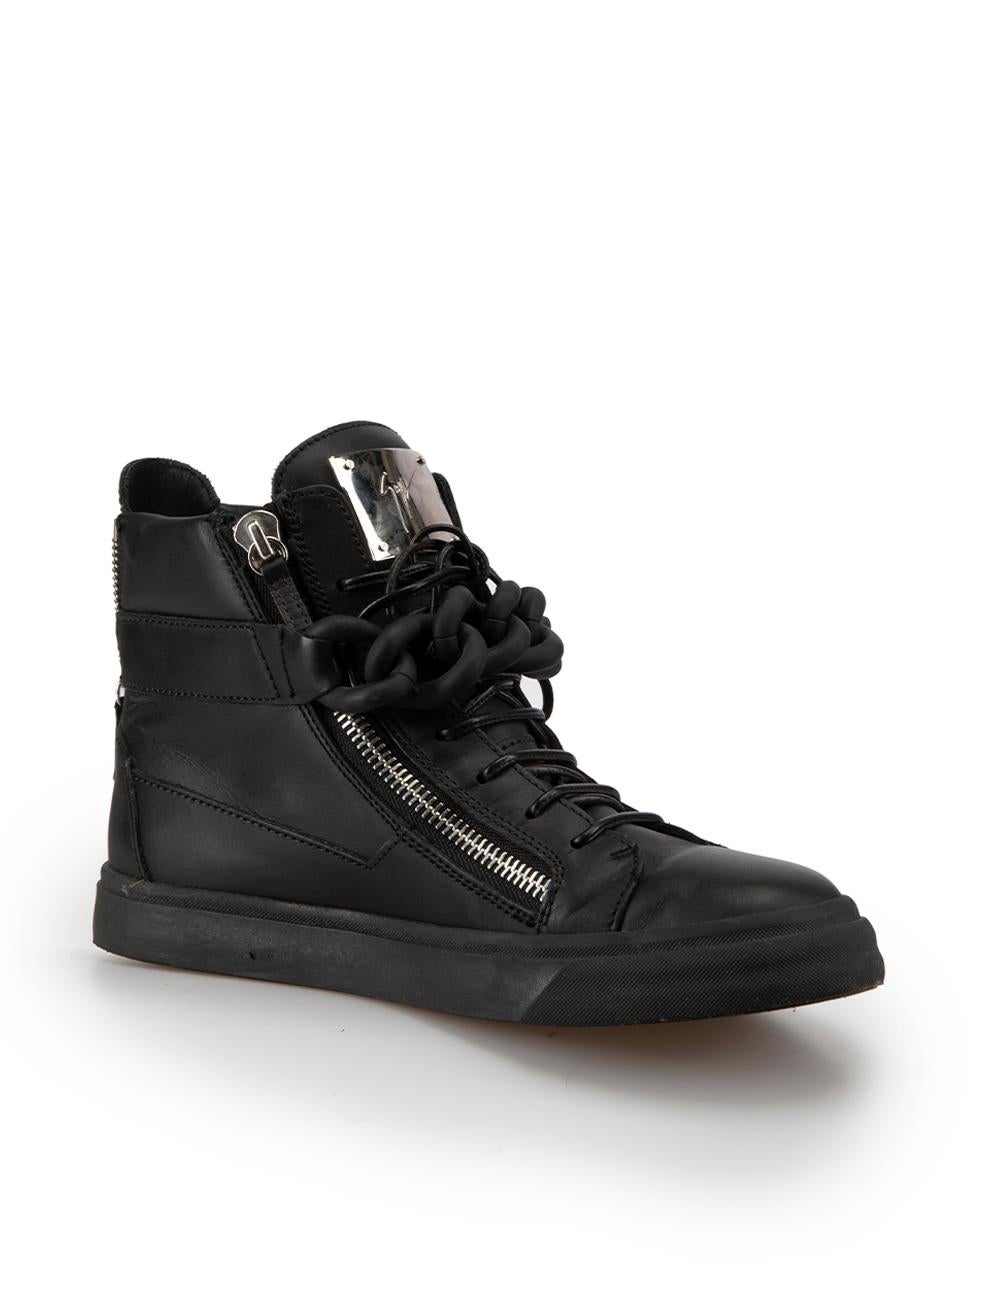 CONDITION is Very good. Hardly any visible wear to shoes is evident on this used Giuseppe Zanotti designer resale item. These shoes come in original box and dust bags.



Details


Black

Leather

High top trainers

Round toe

Flat heel

Lace up